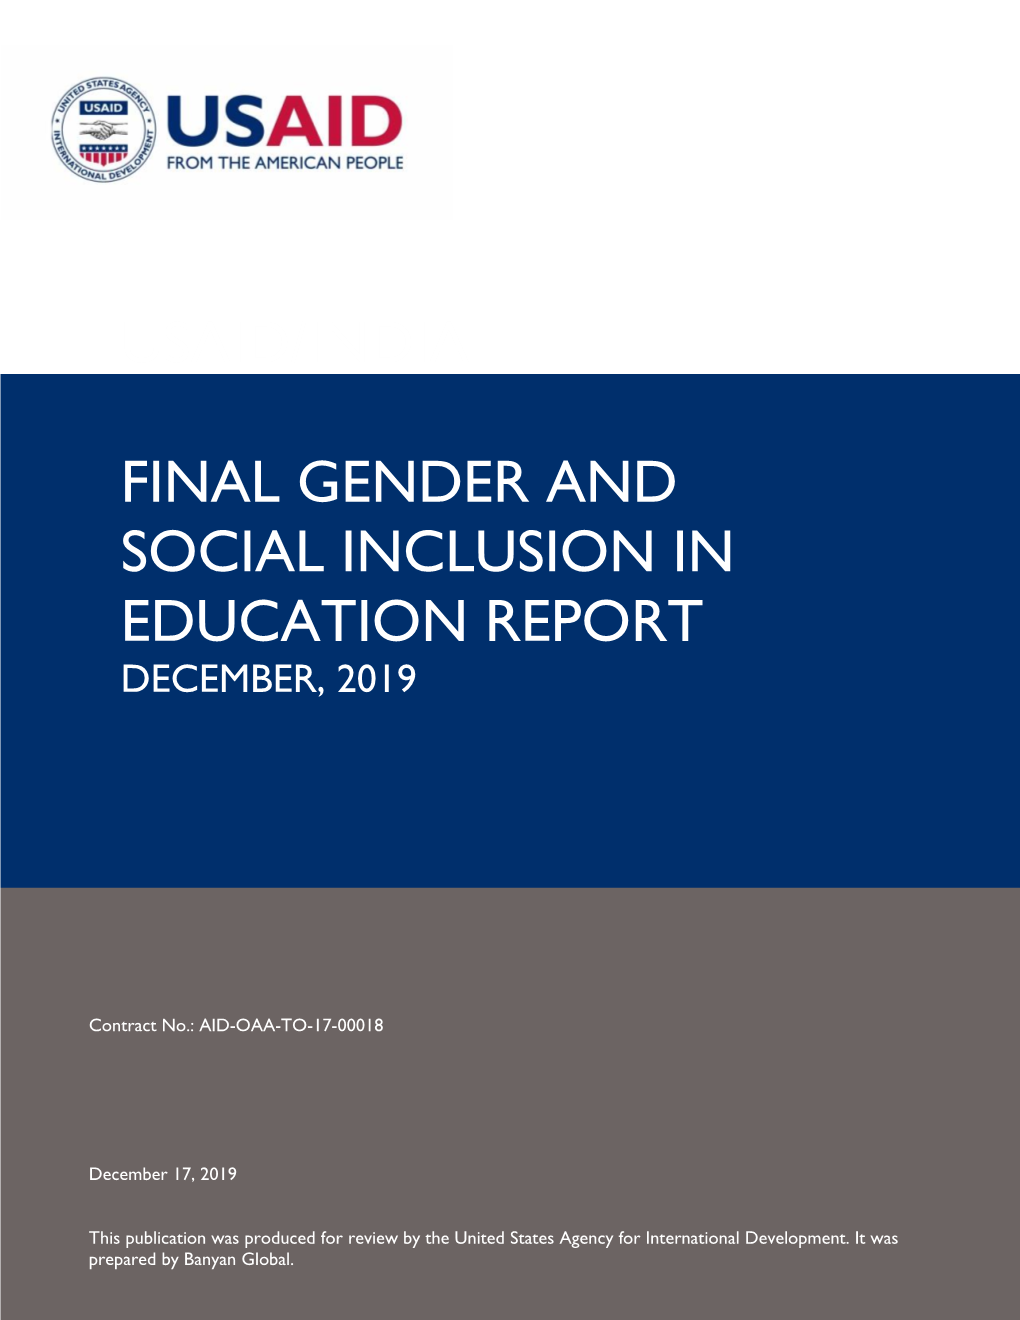 Final Gender and Social Inclusion in Education Report December, 2019